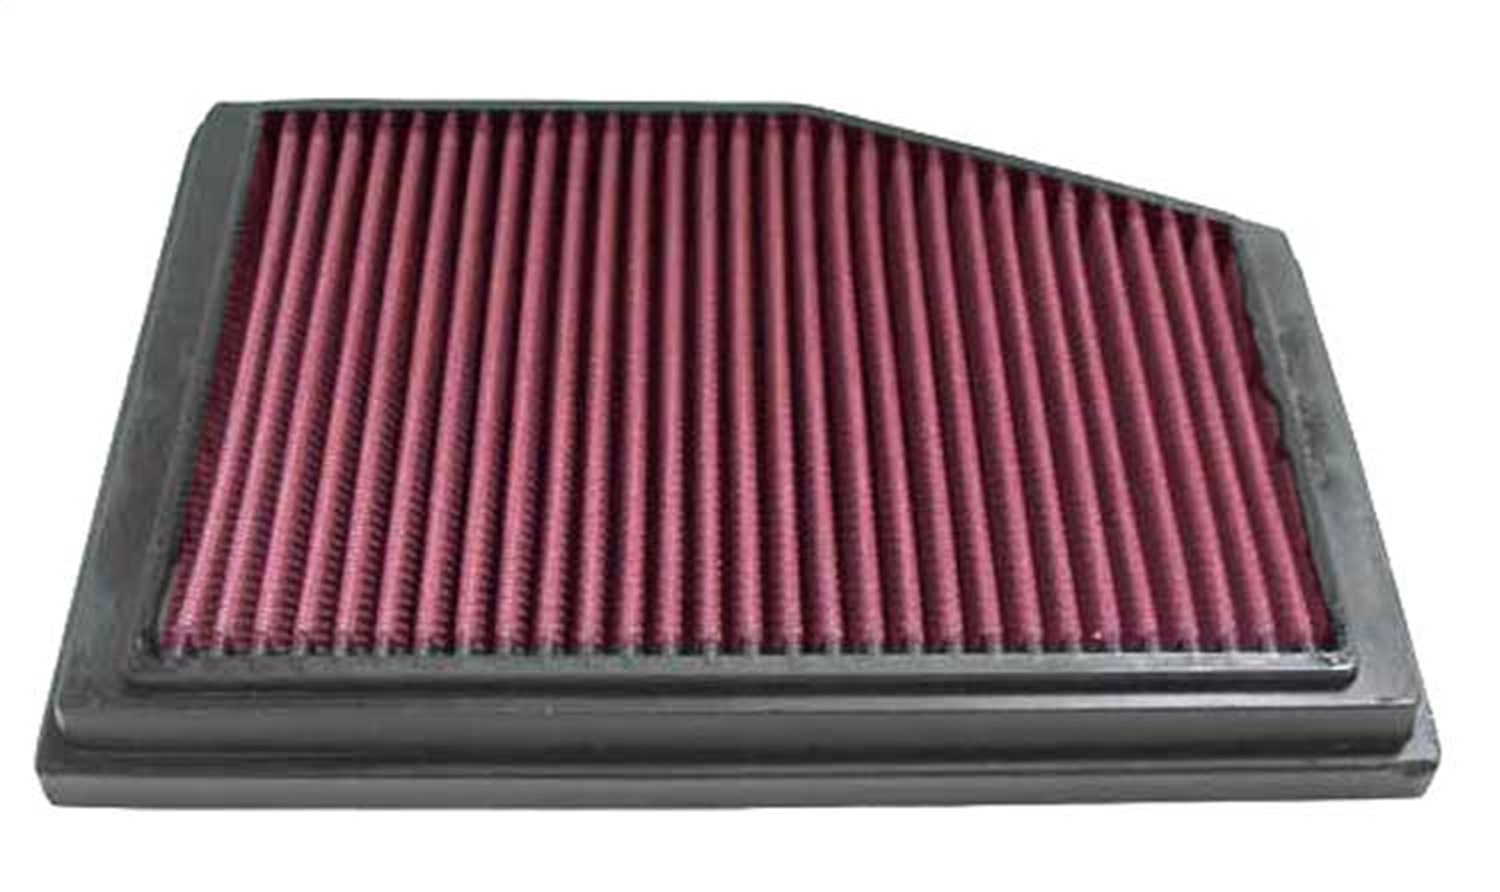 K&N Filters K&N Filters 33-2773 Air Filter Fits 97-04 Boxster